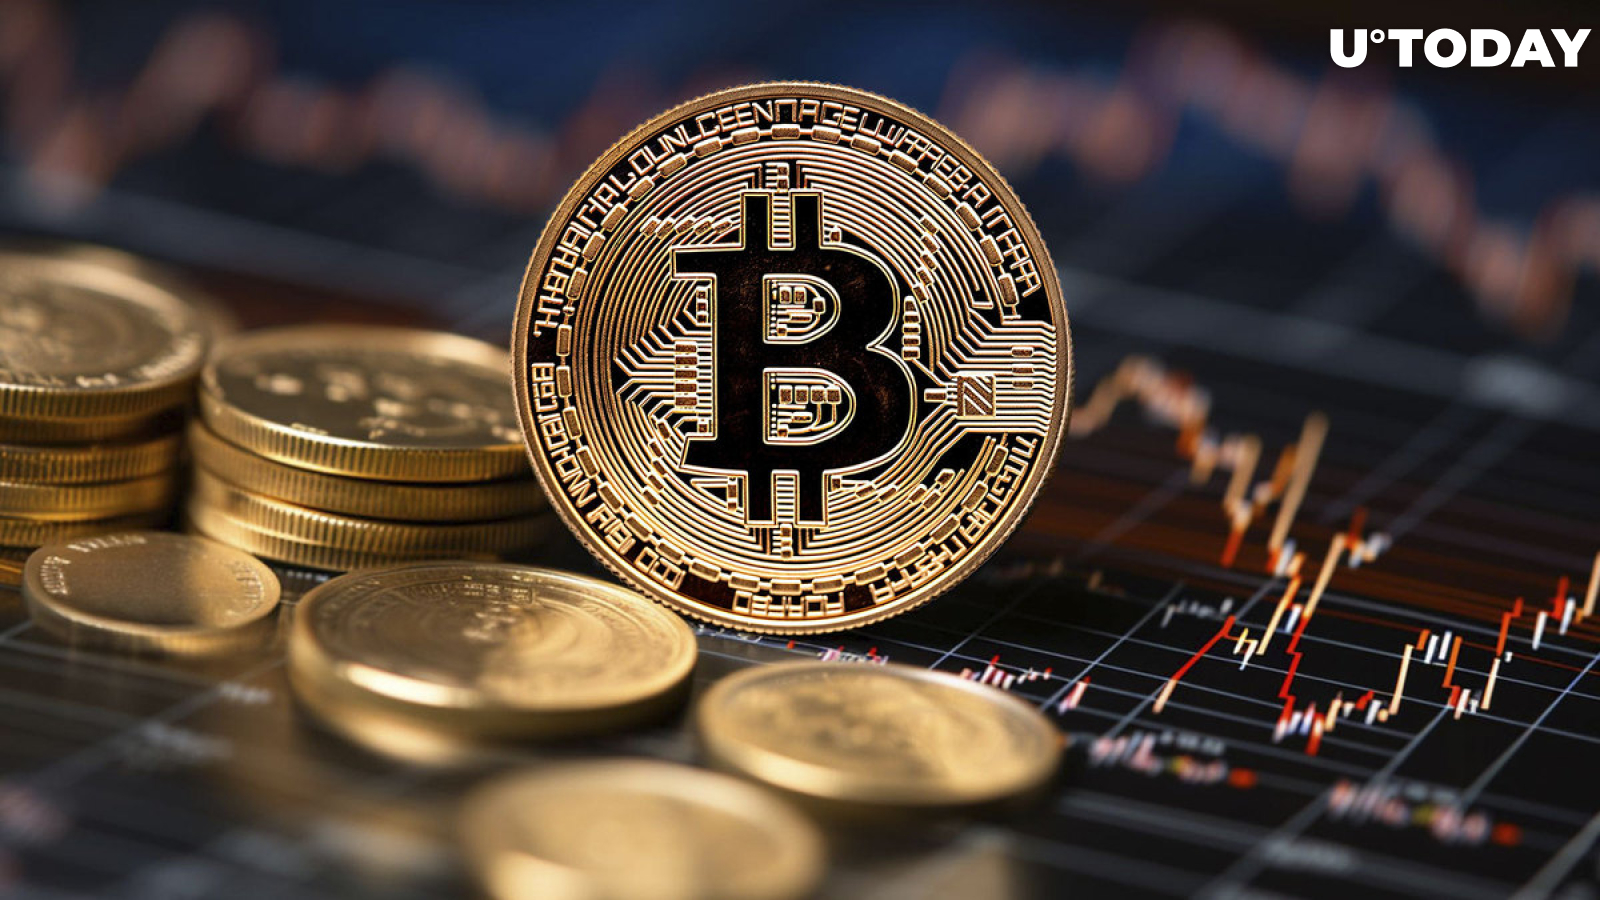 Bitcoin (BTC) at End of Correction, Top Analyst Suggests